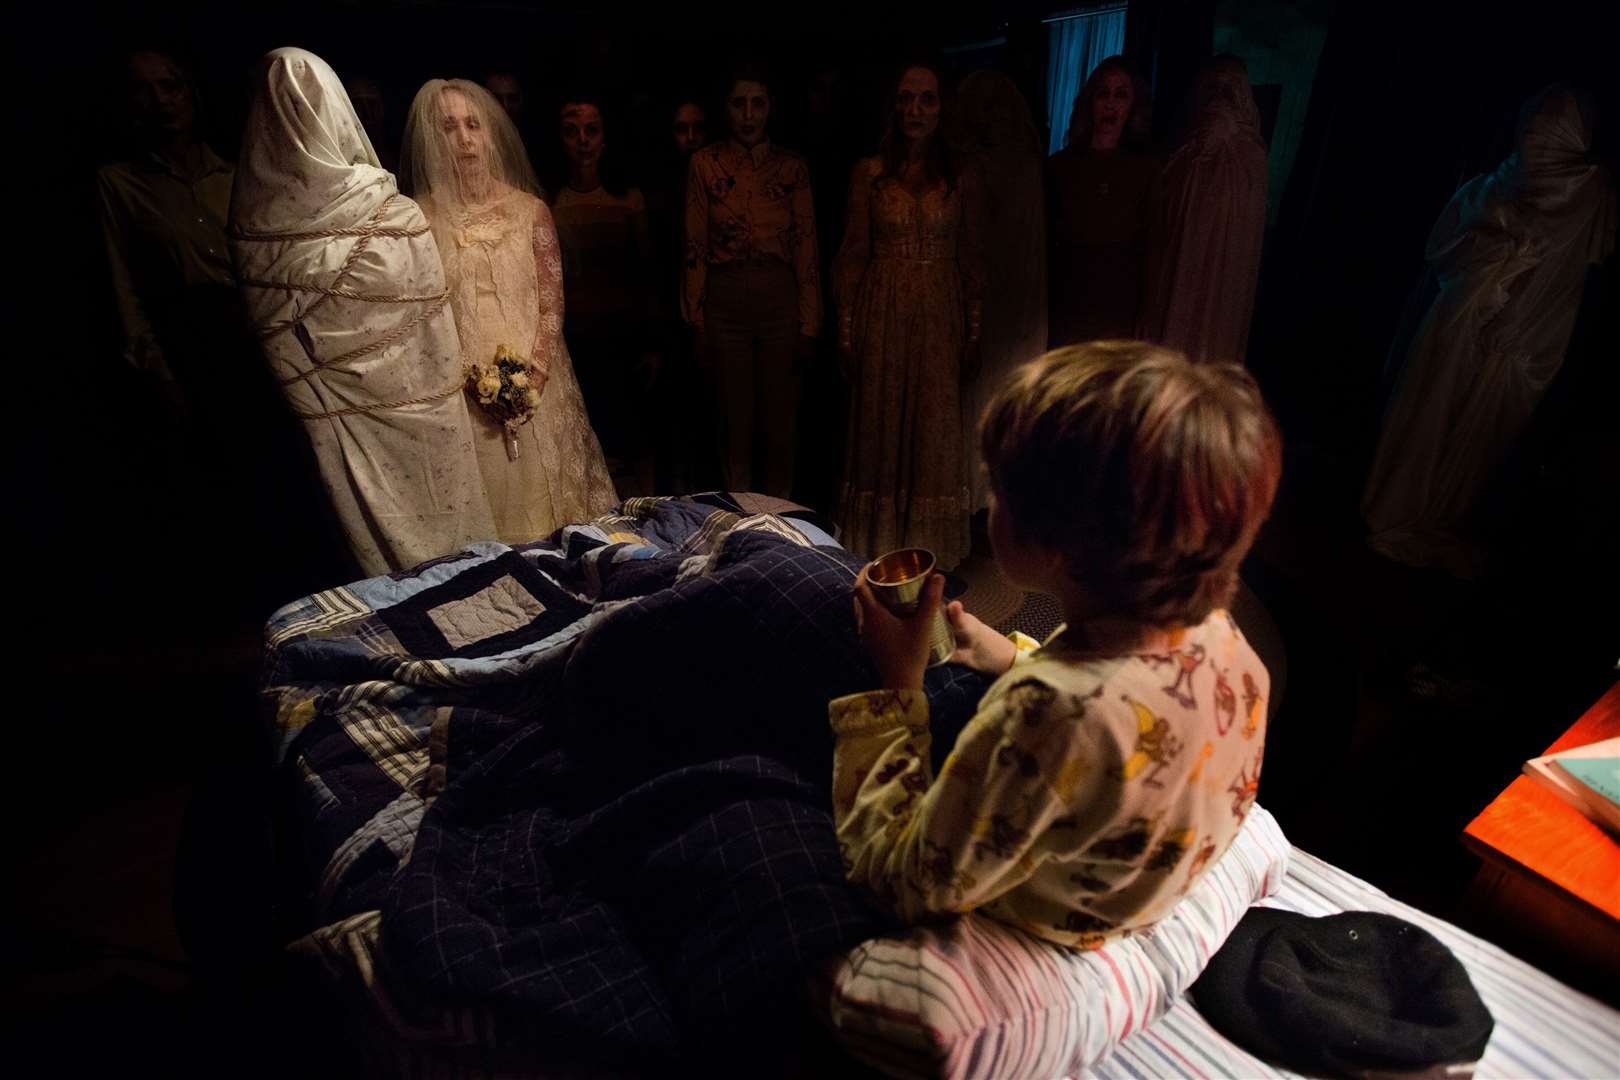 Insidious - Chapter 2 with Ty Simpkins as Dalton Lambert. Picture: PA Photo/Entertainment One.